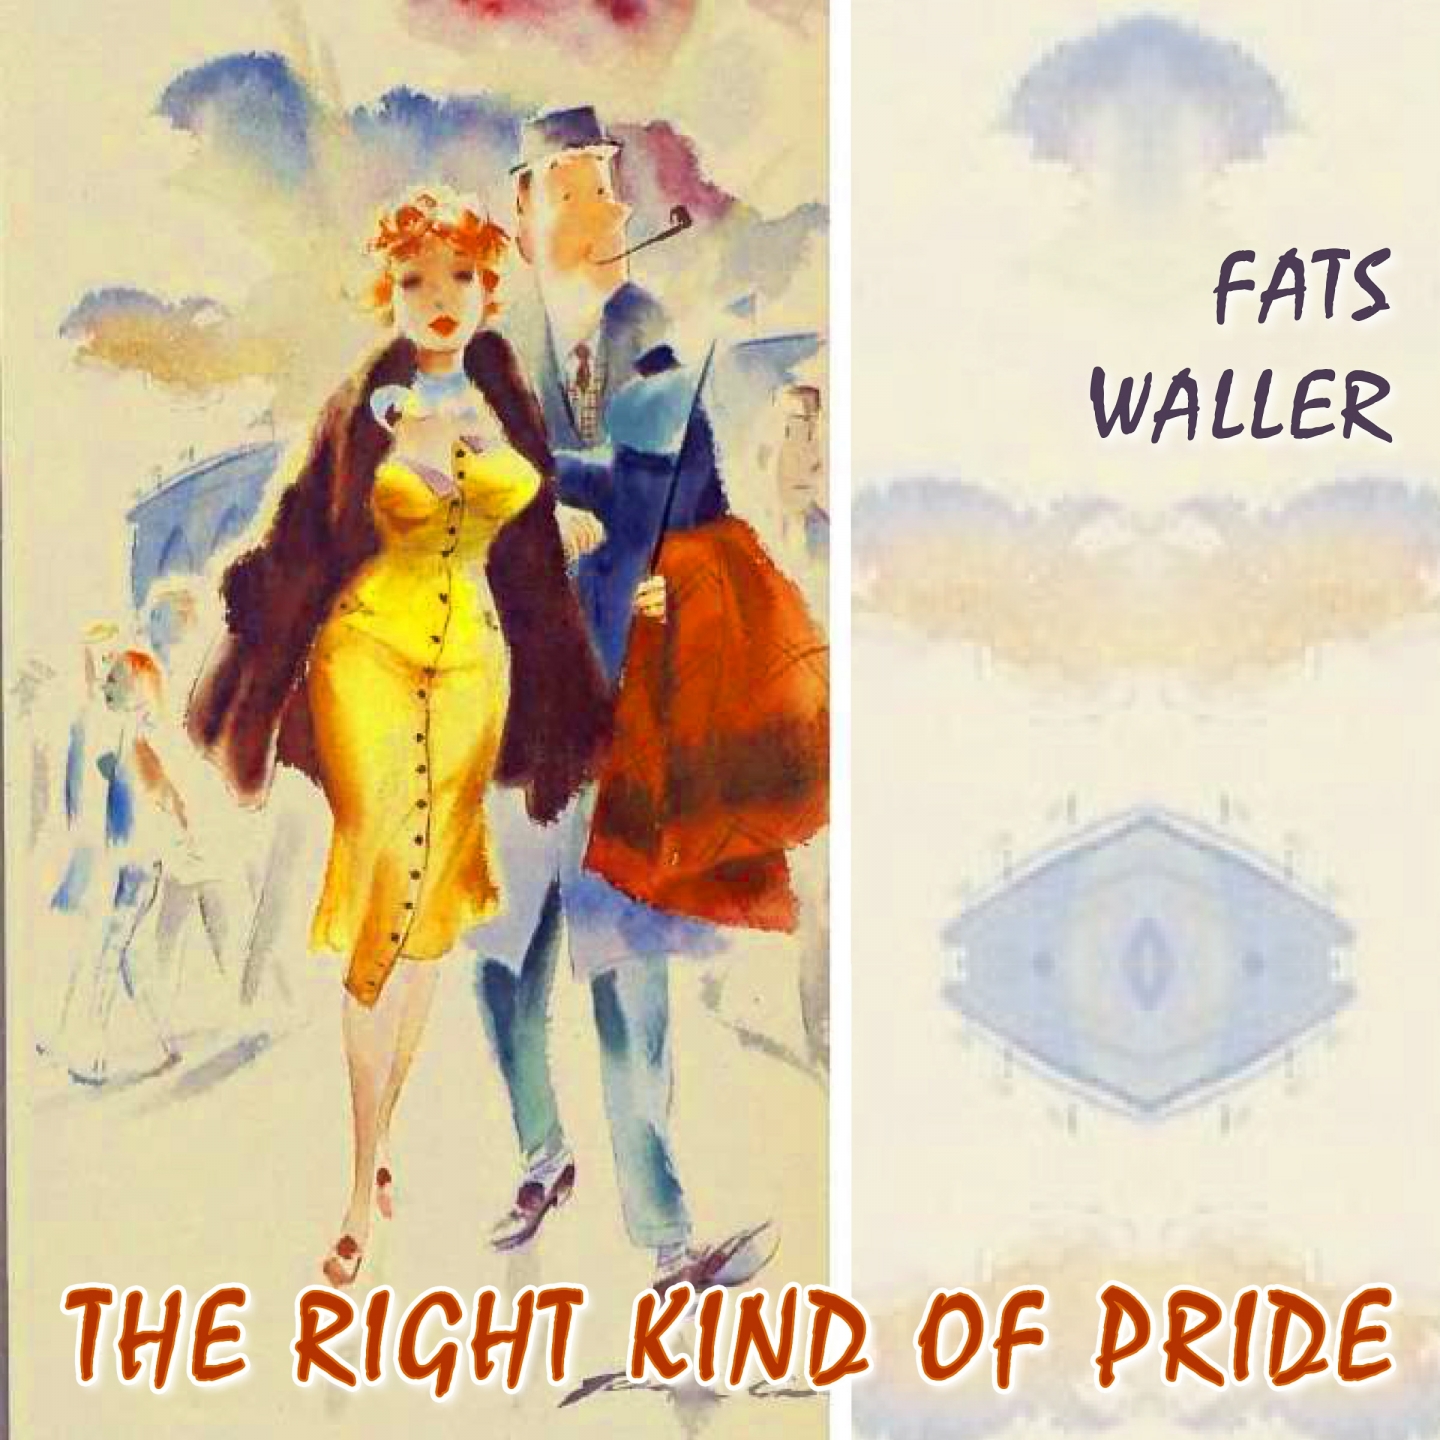 The Right Kind Of Pride